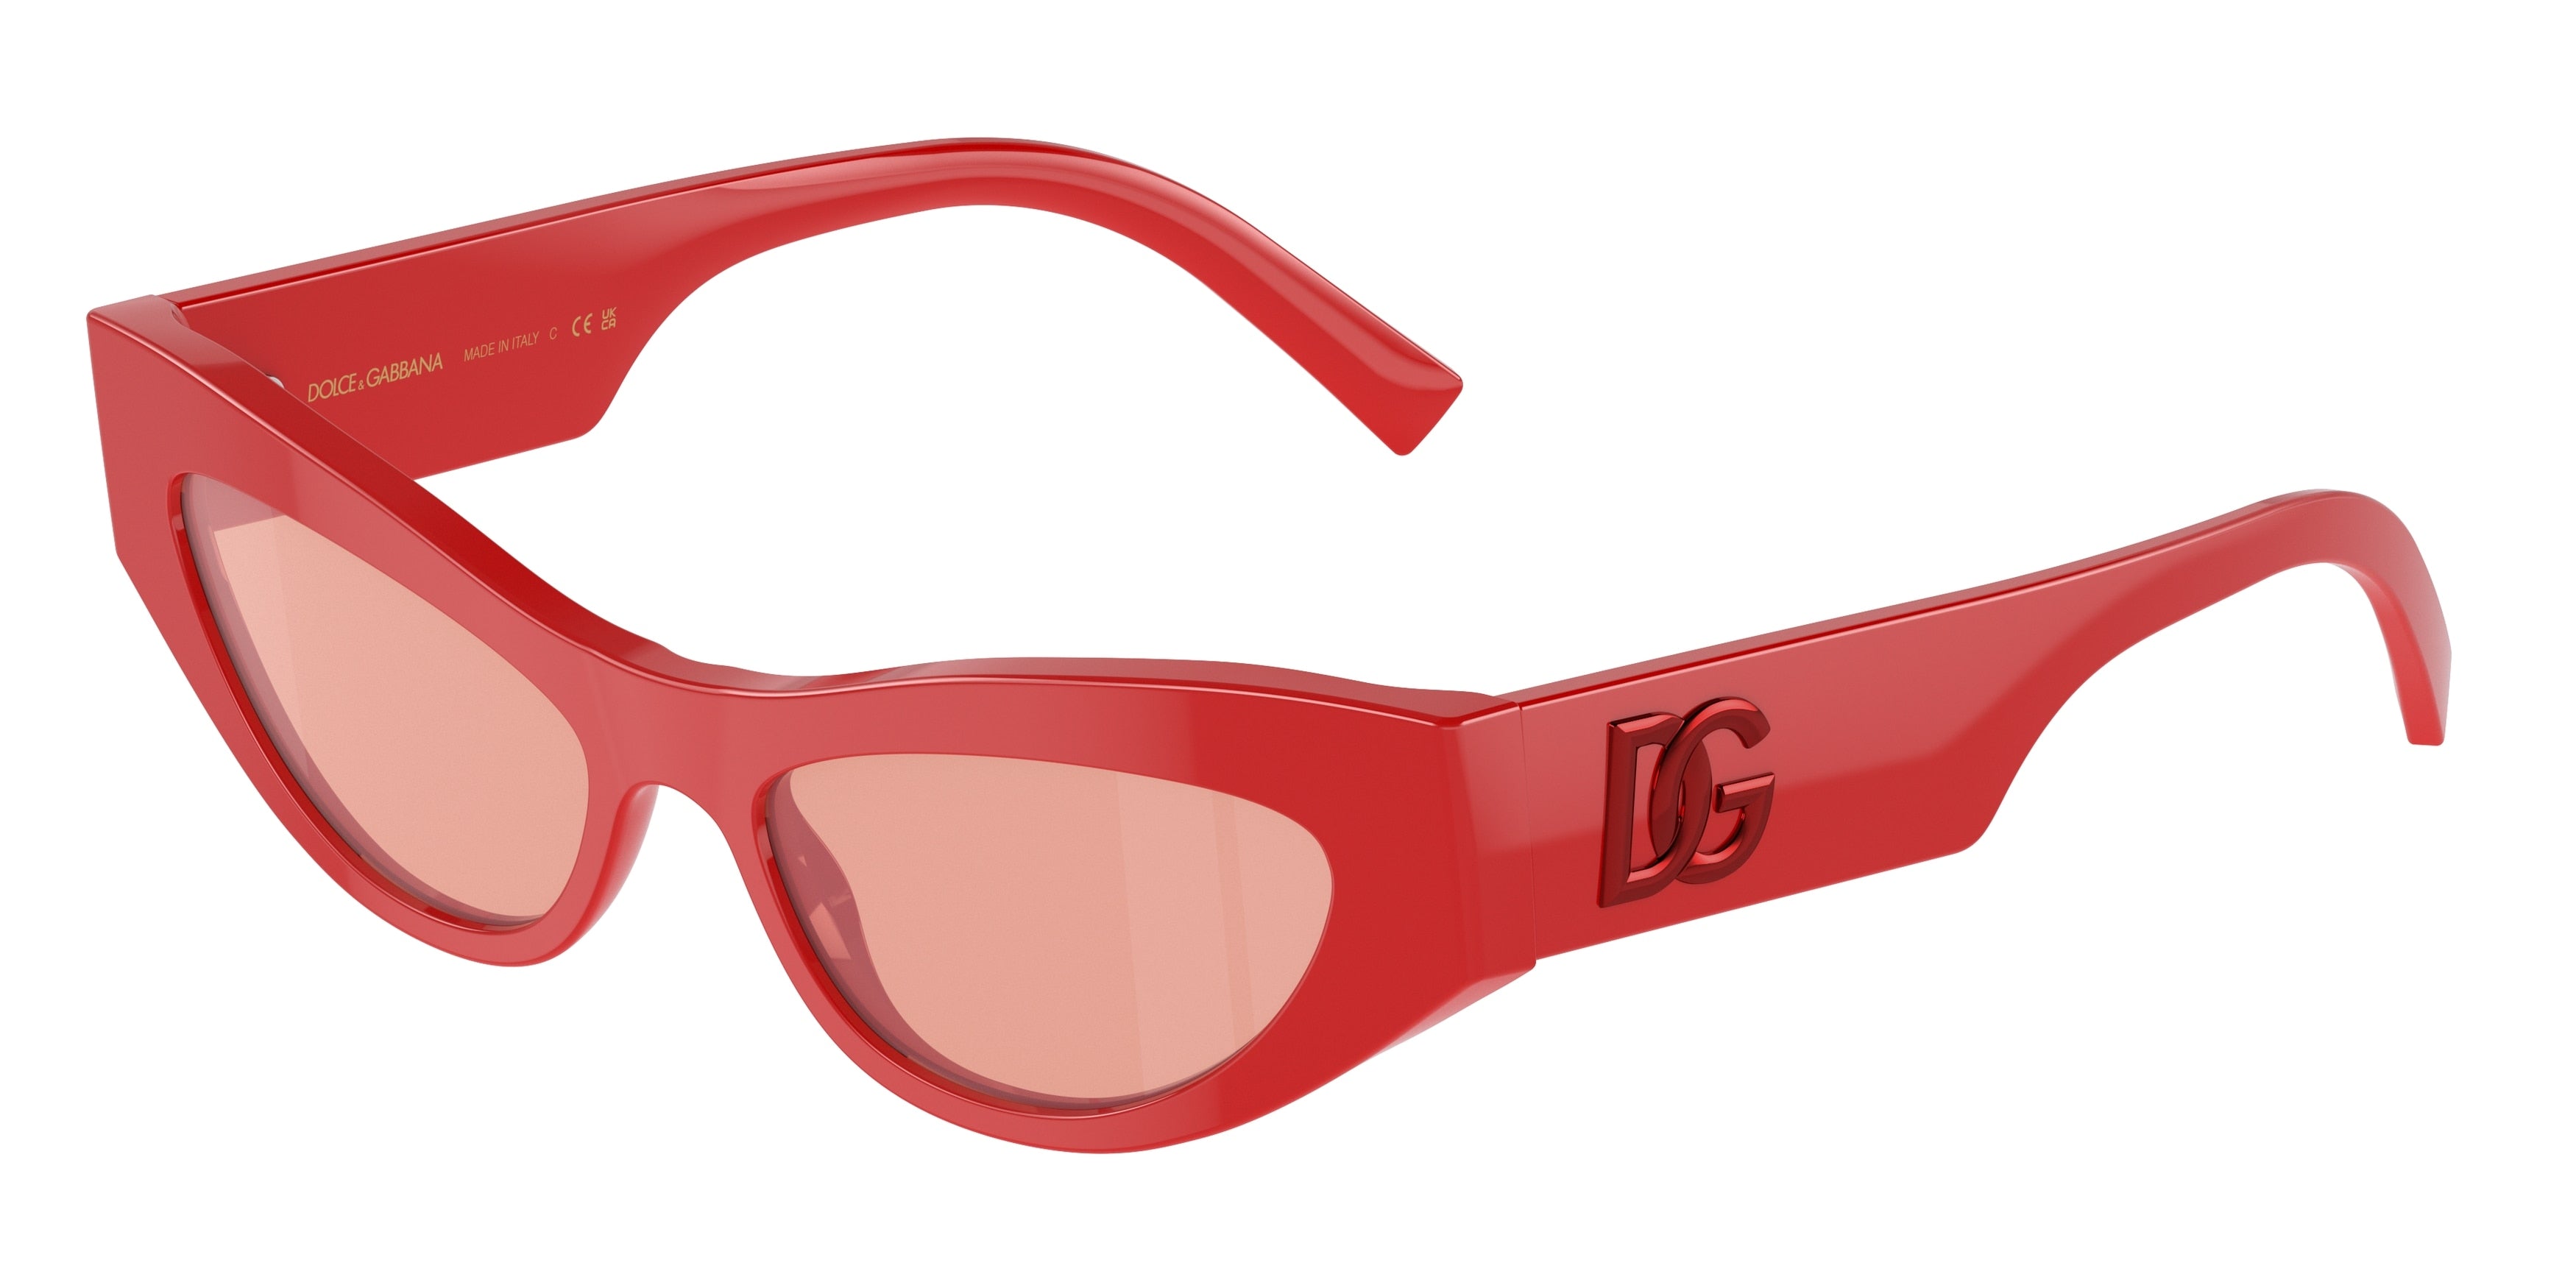 DOLCE & GABBANA DG4450 Cat Eye Sunglasses  3088E4-Red 52-145-16 - Color Map Red